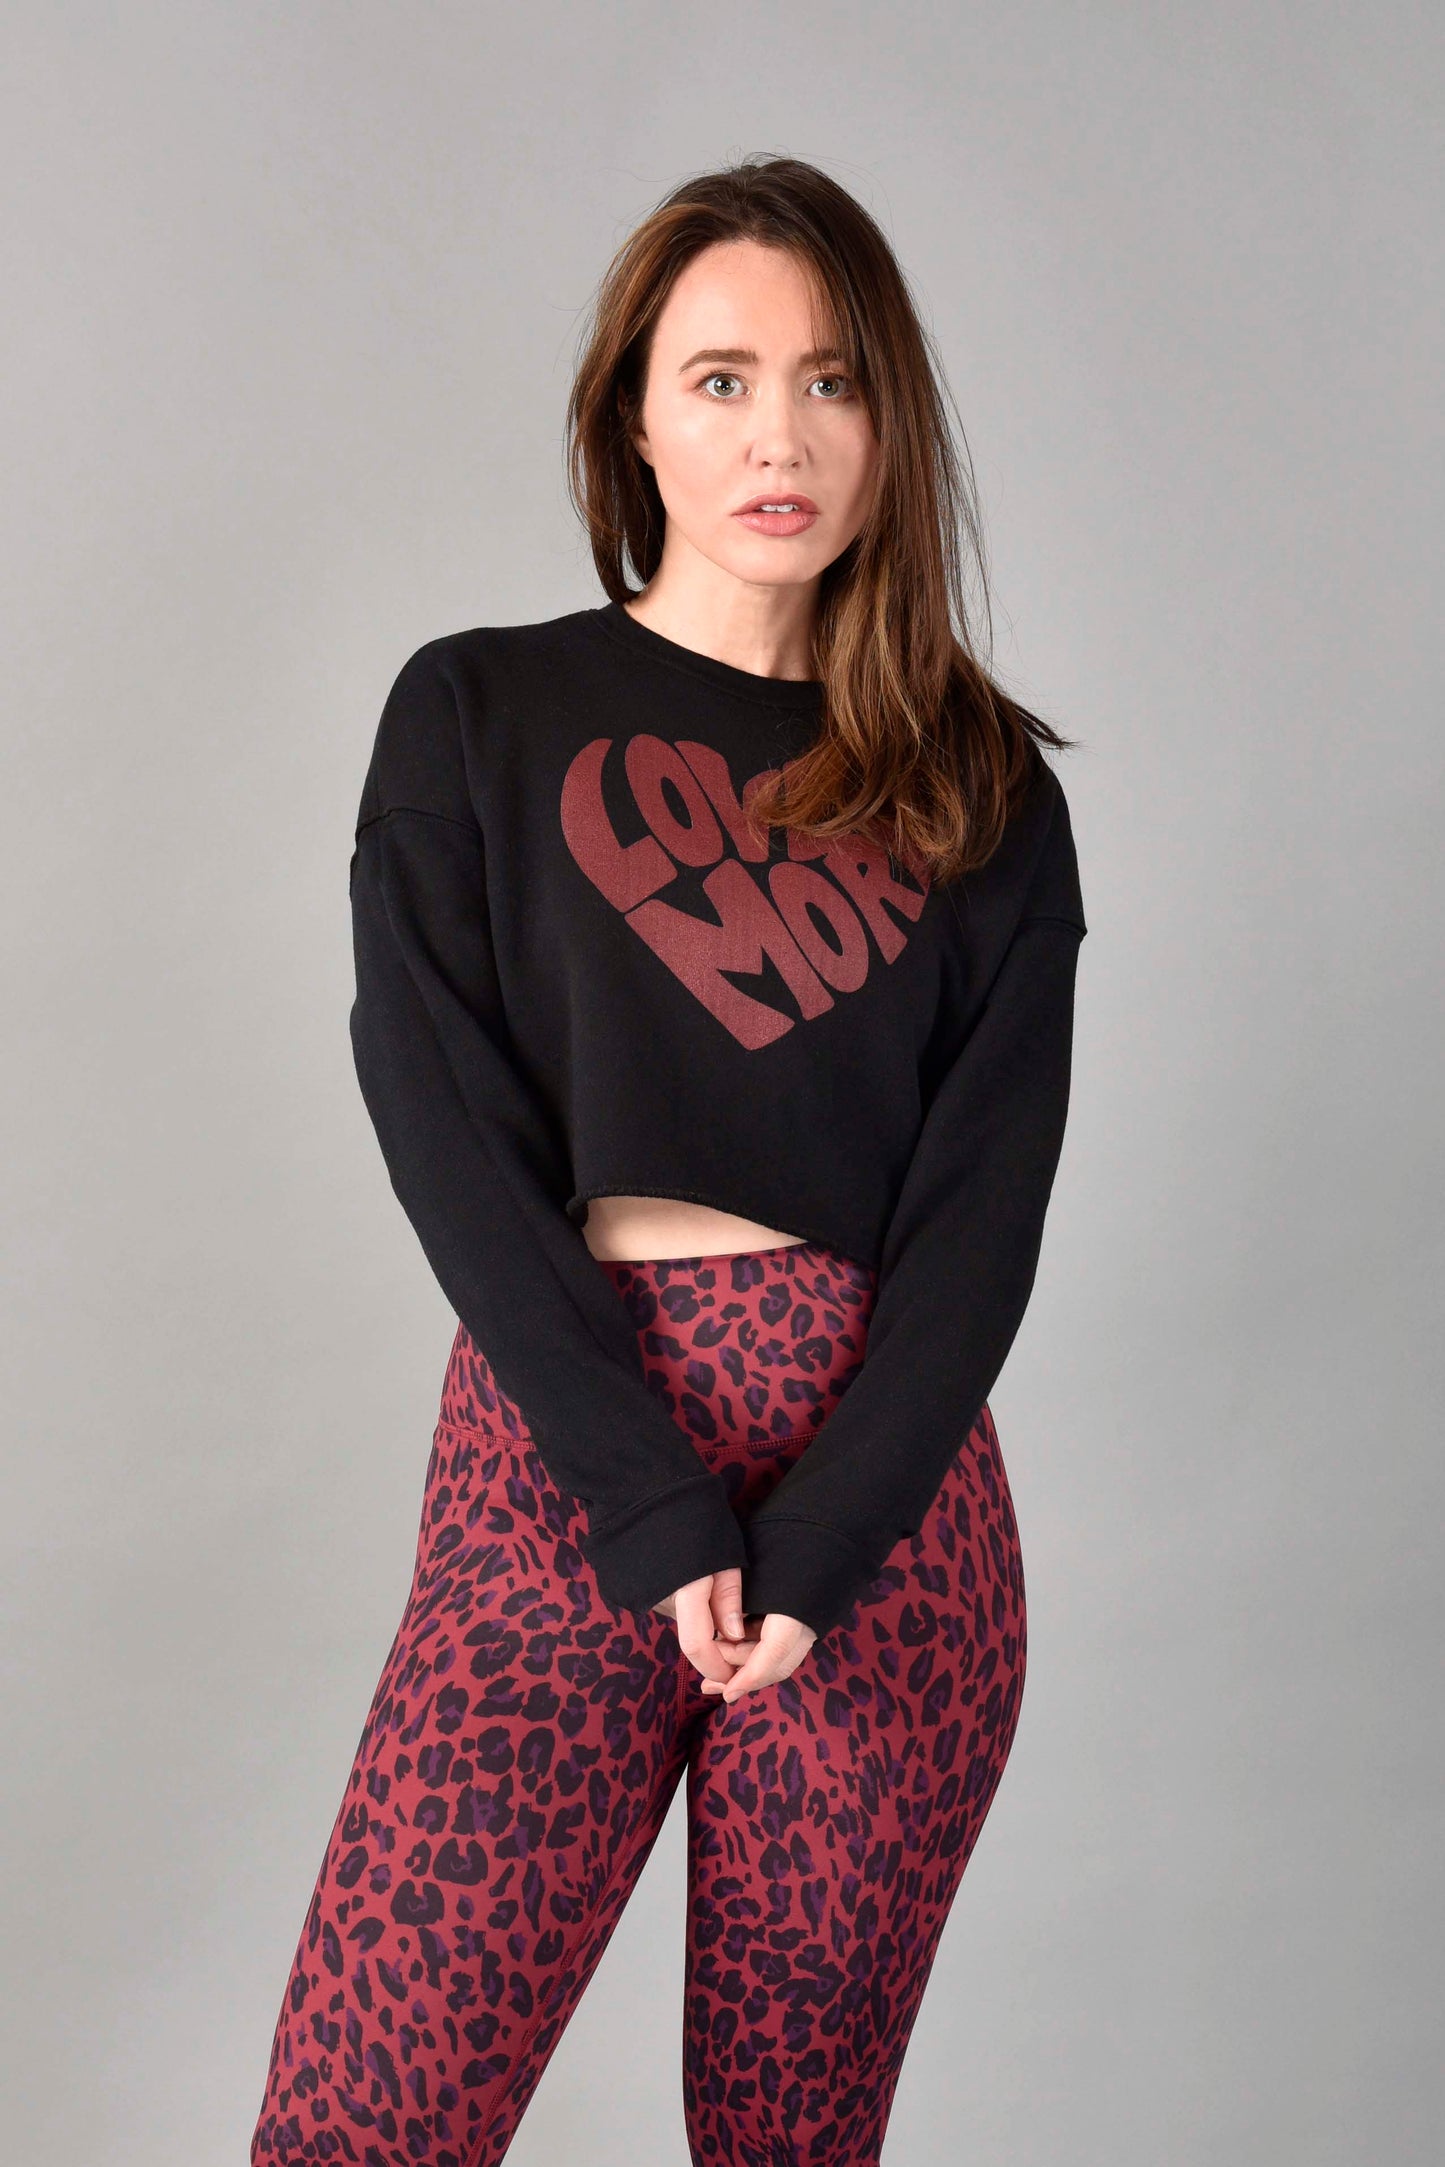 WEAR LOVE MORE Love More Crop Sweatshirt.  Cropped Sweatshirt with Signature Love More Heart Graphic in Red.